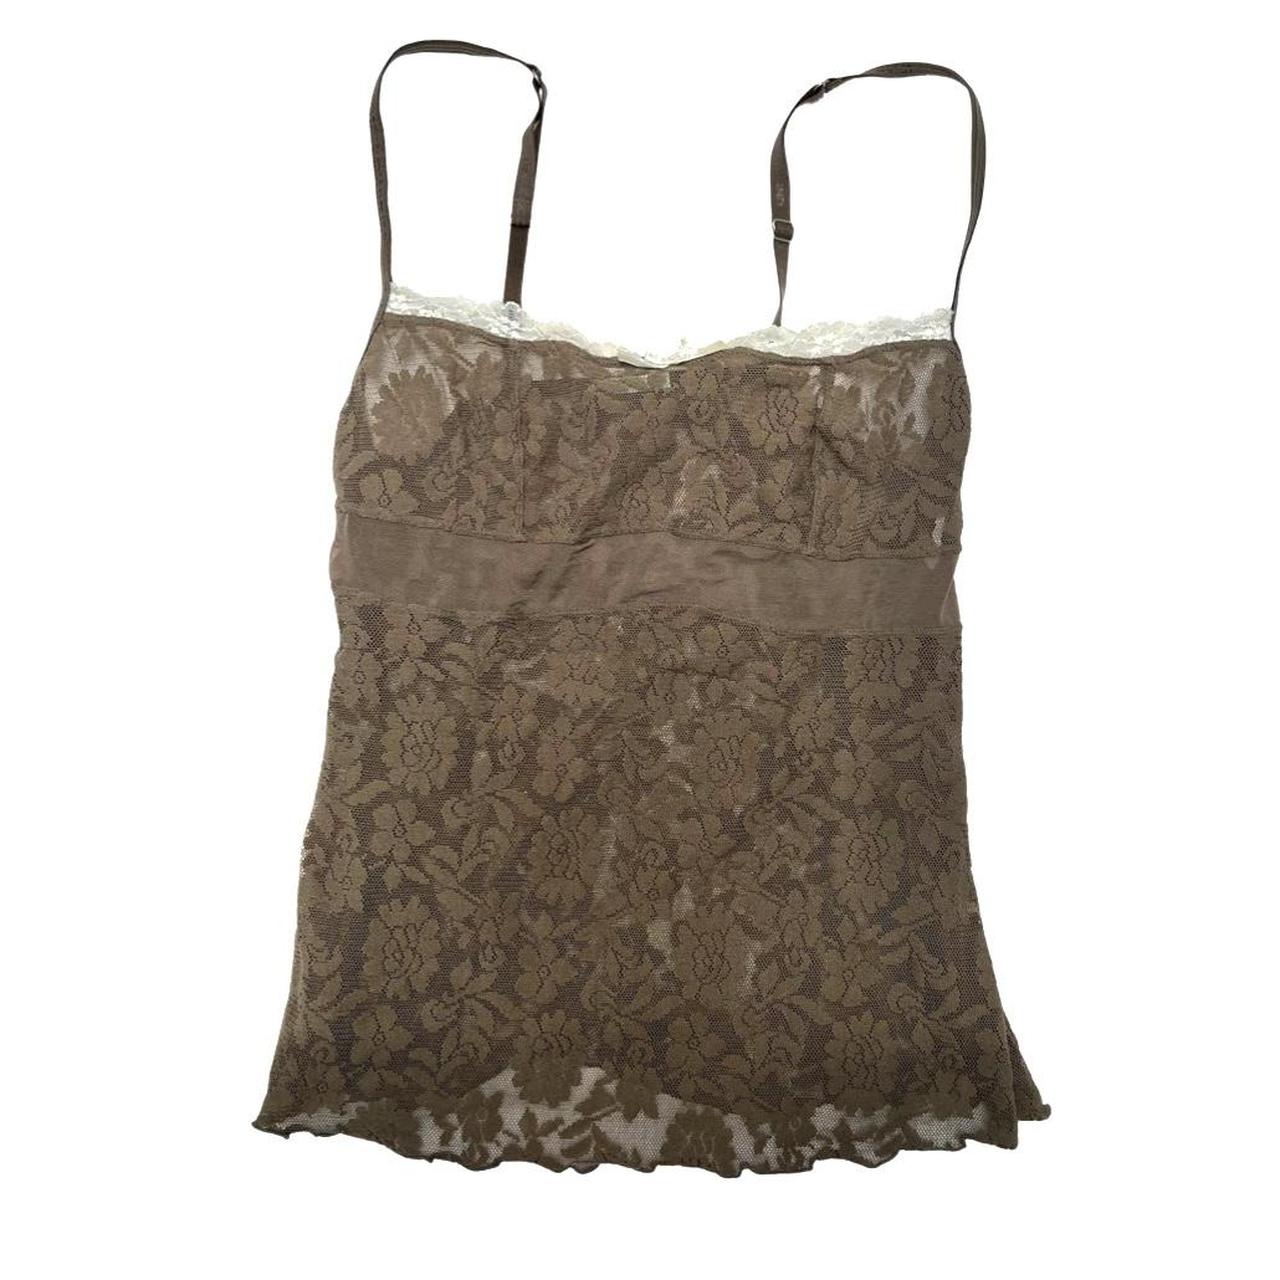 Vintage 00s Benetton brown sheer lace cami top with... - Depop